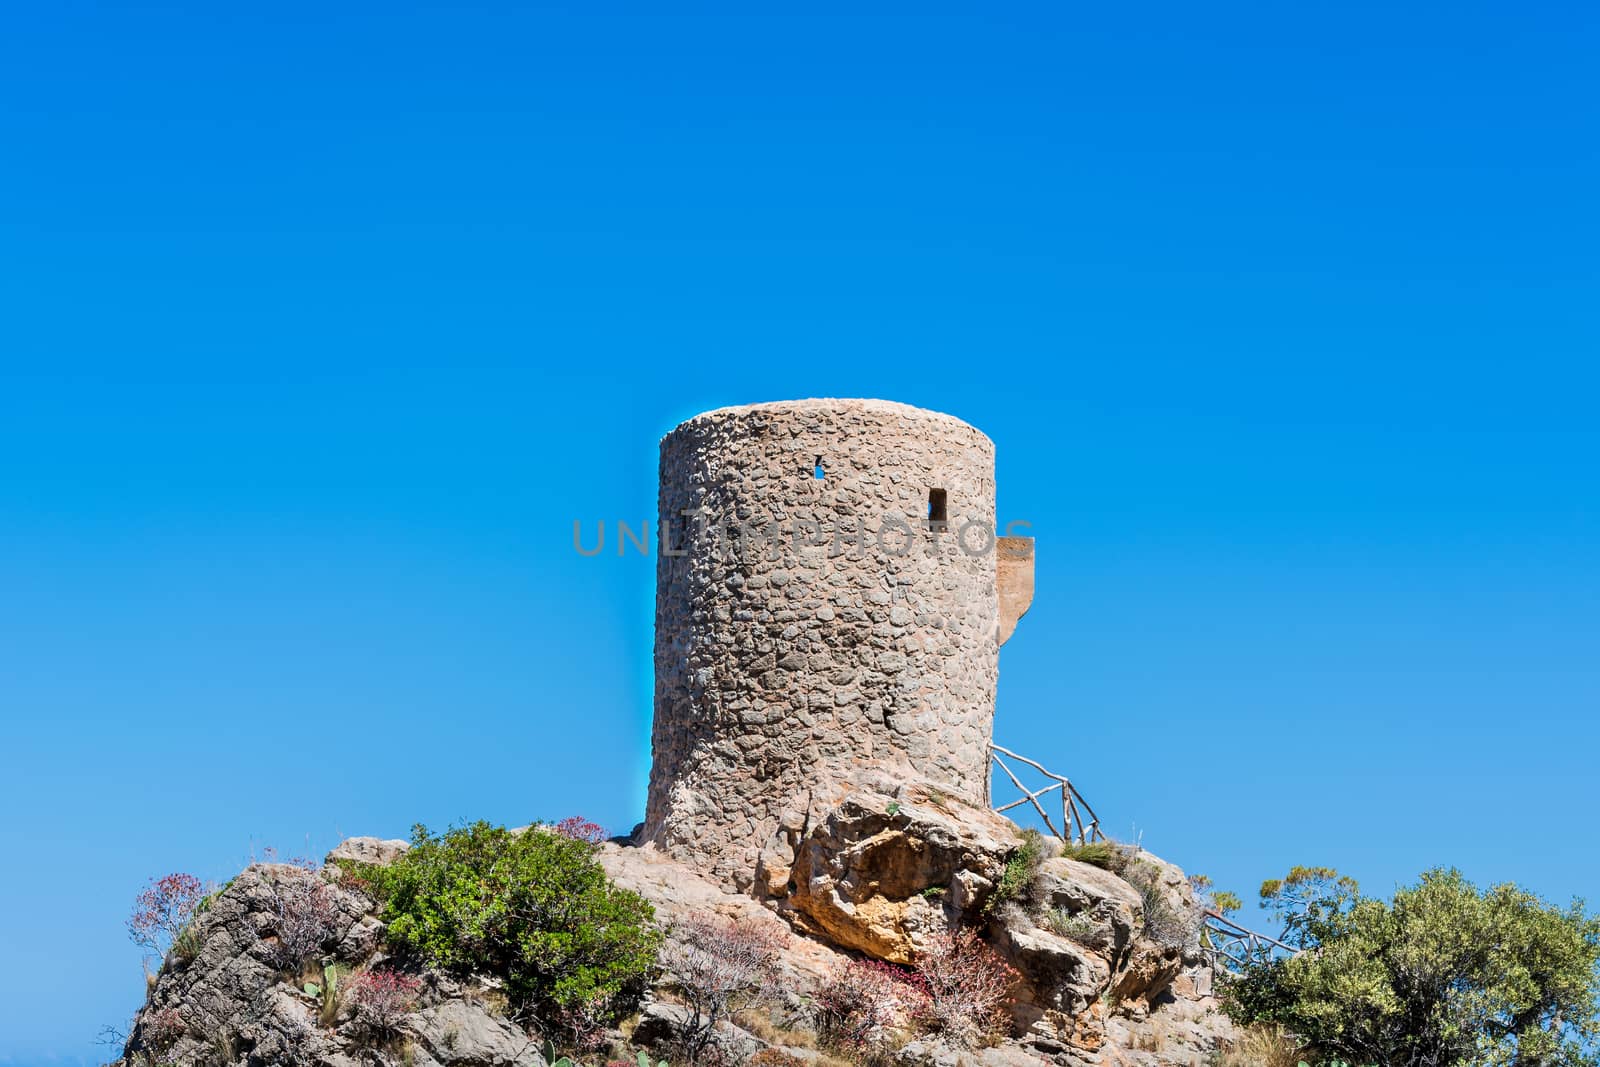 Age signal tower and watchtower or defense tower in Mallorca, Spain.